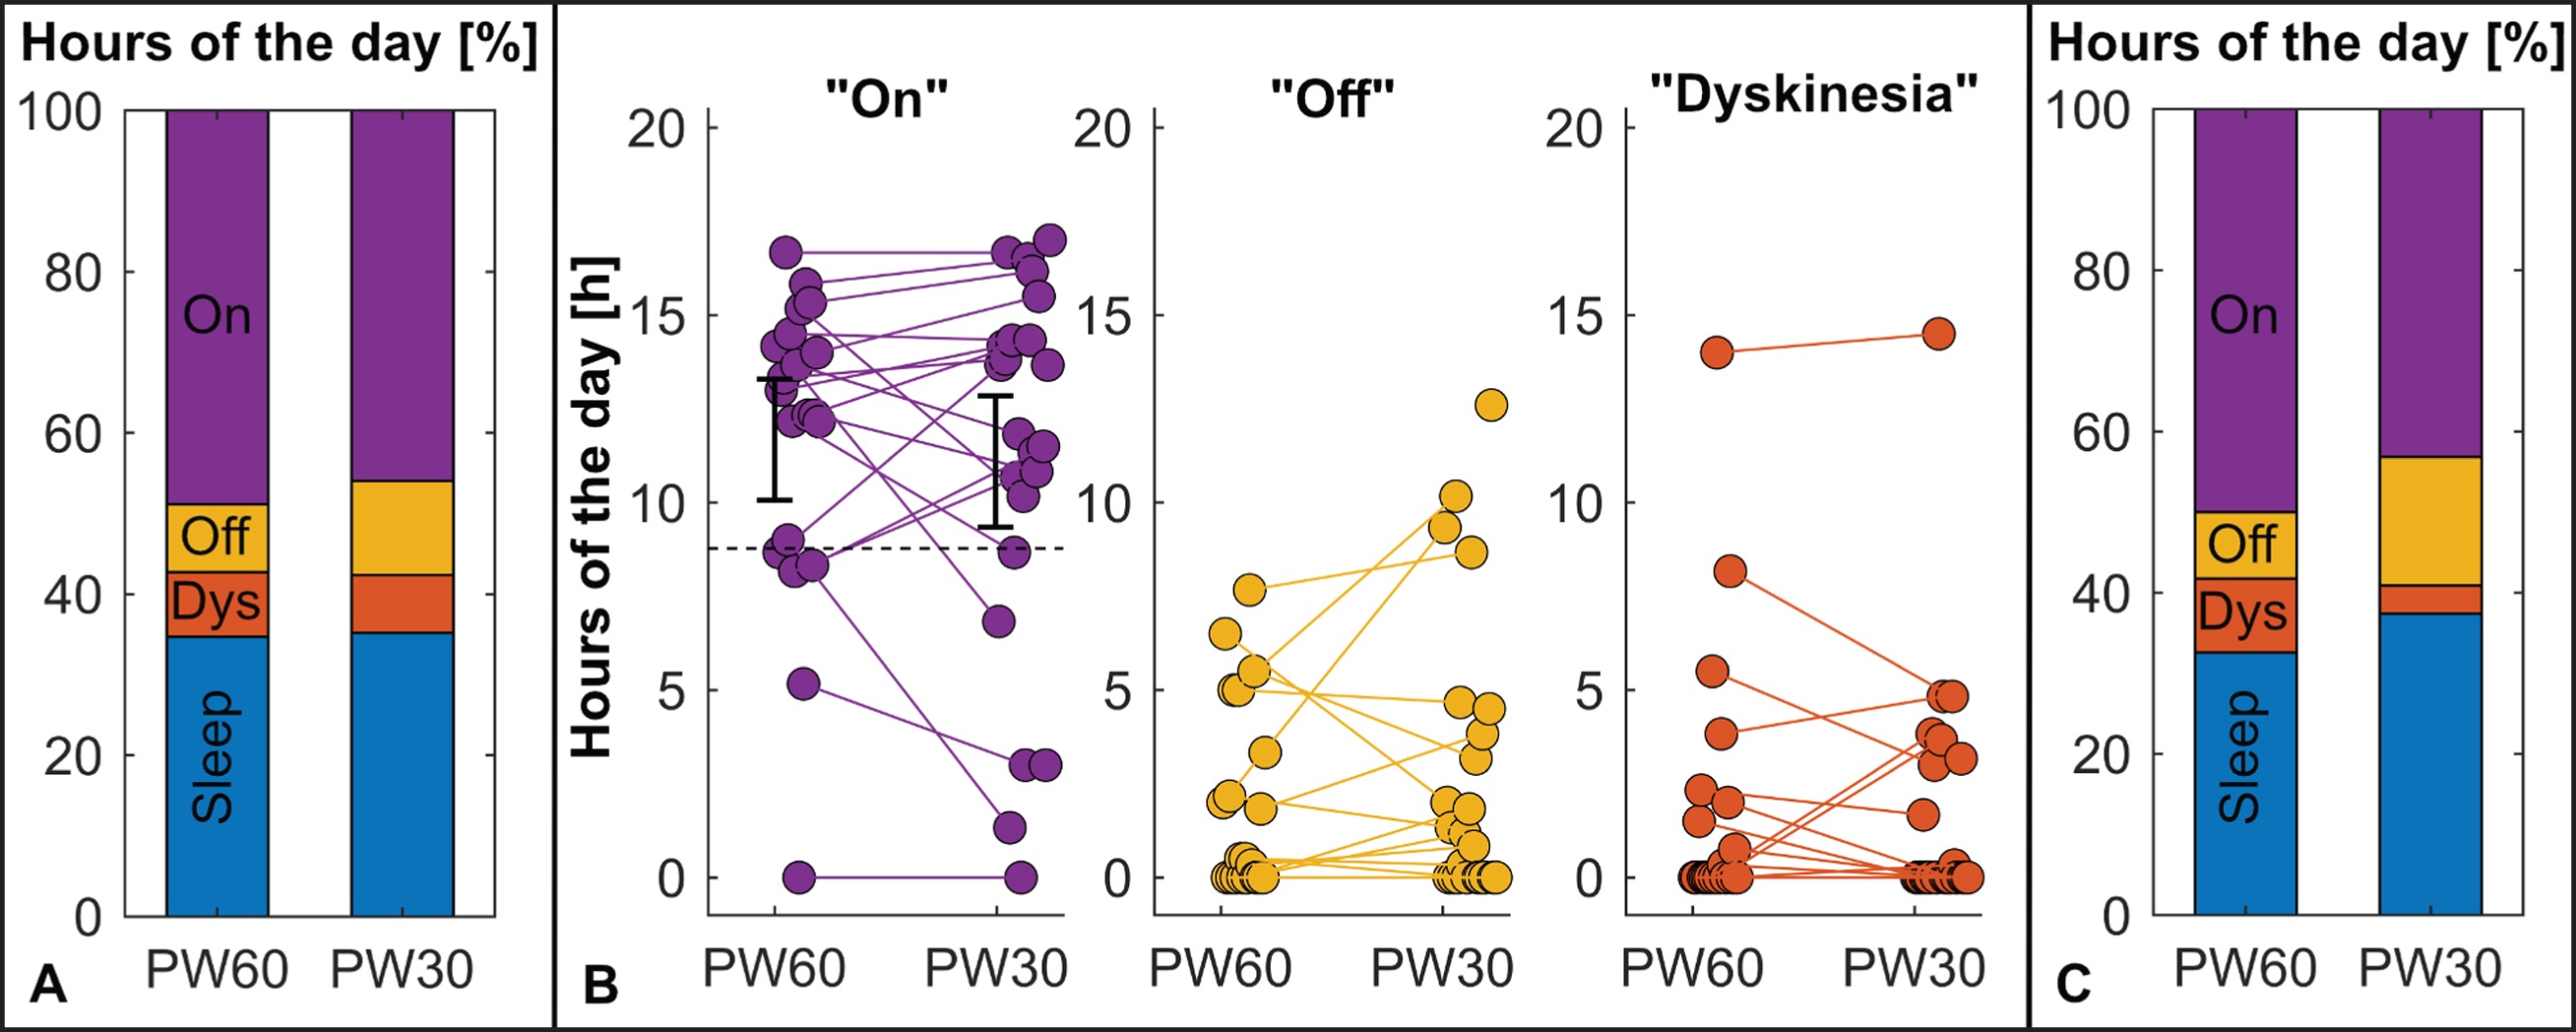 Motor Diary Outcomes. A) There were no differences in motor states as on the group level between treatment conditions. B) On the subject level, individual differences between the treatment conditions were observed. Relation of the respective 90% -CI and the non-inferiority margin (dashed line) for the “On” state, the primary outcome parameter, is indicated in the respective subfigure. C) Patients preferring 30 μs (N = 9) seemed to experience more dyskinesia in their non-preferred 60 μs setting (PW60), whereas patients preferring 60 μs (N = 9) tended to have more Off-time in their non-preferred 30 μs setting (PW30). PW30, trial condition with 30 μs; PW60, trial condition with 60 μs.